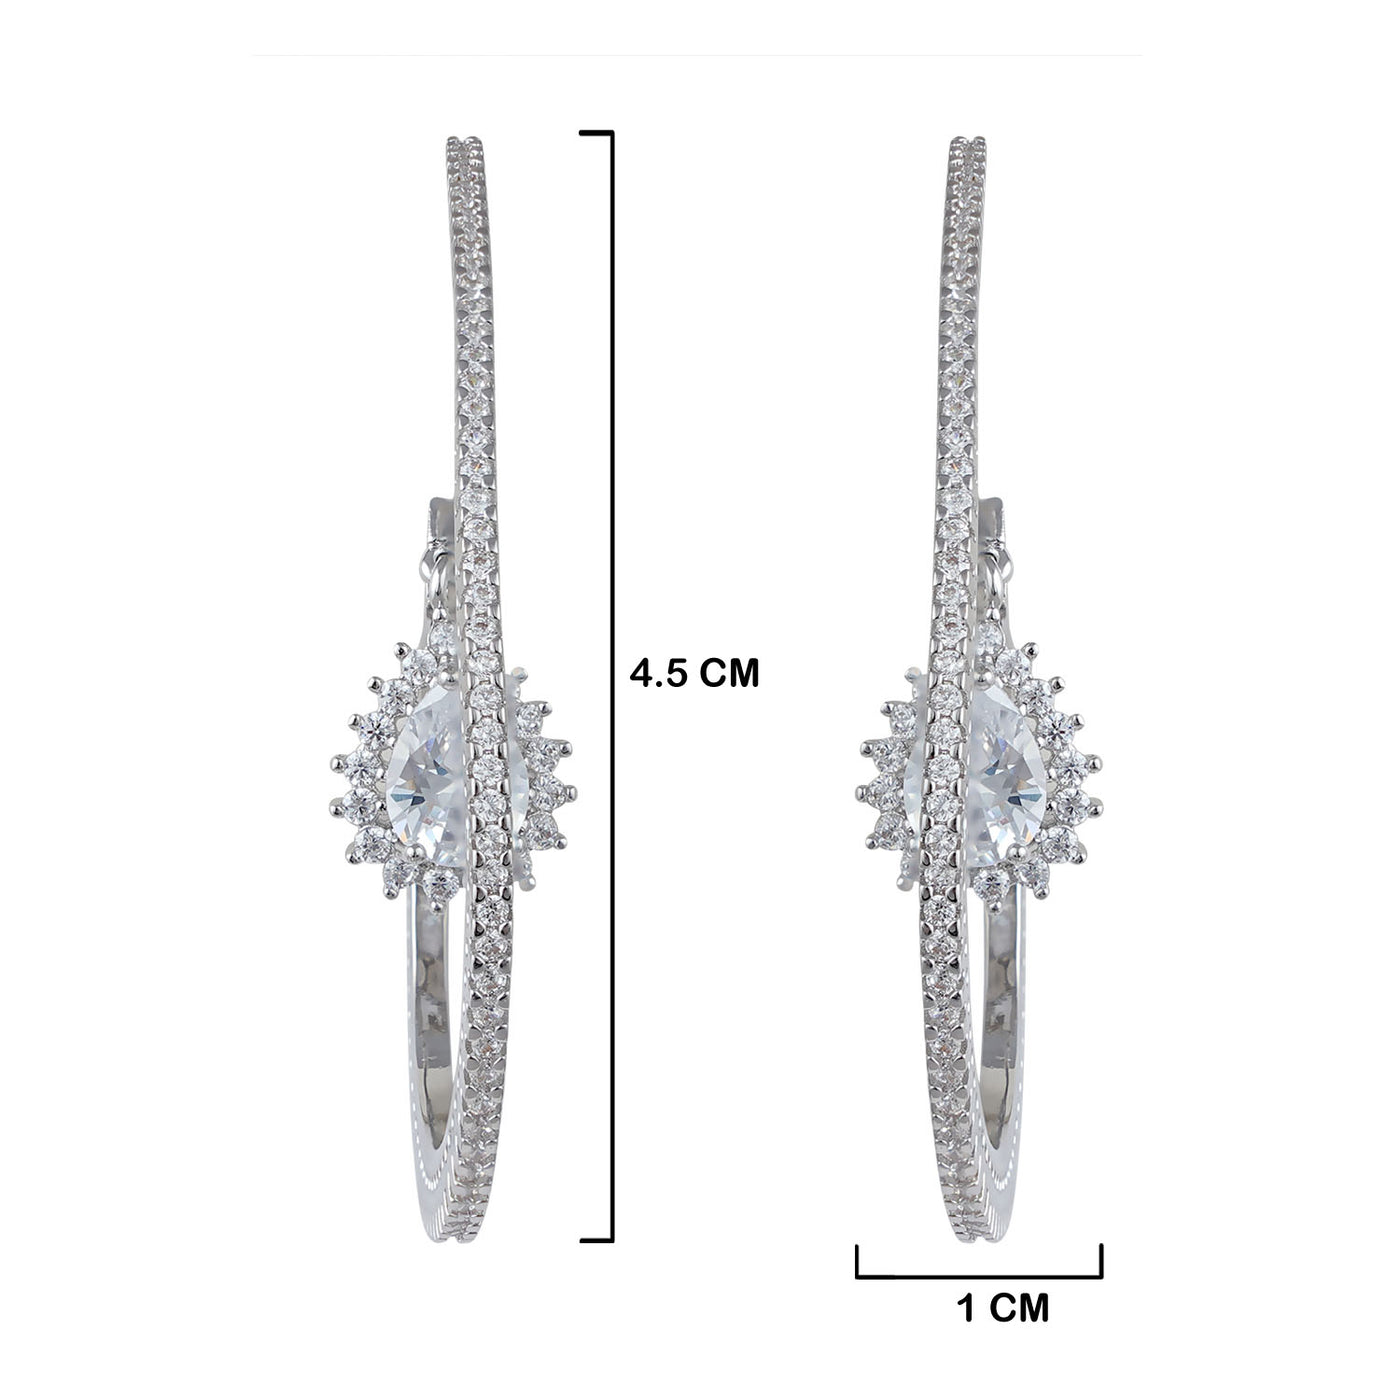 Stone Centred Cubic Zirconia Earrings with measurements in cm. 4.5cm by 1cm.